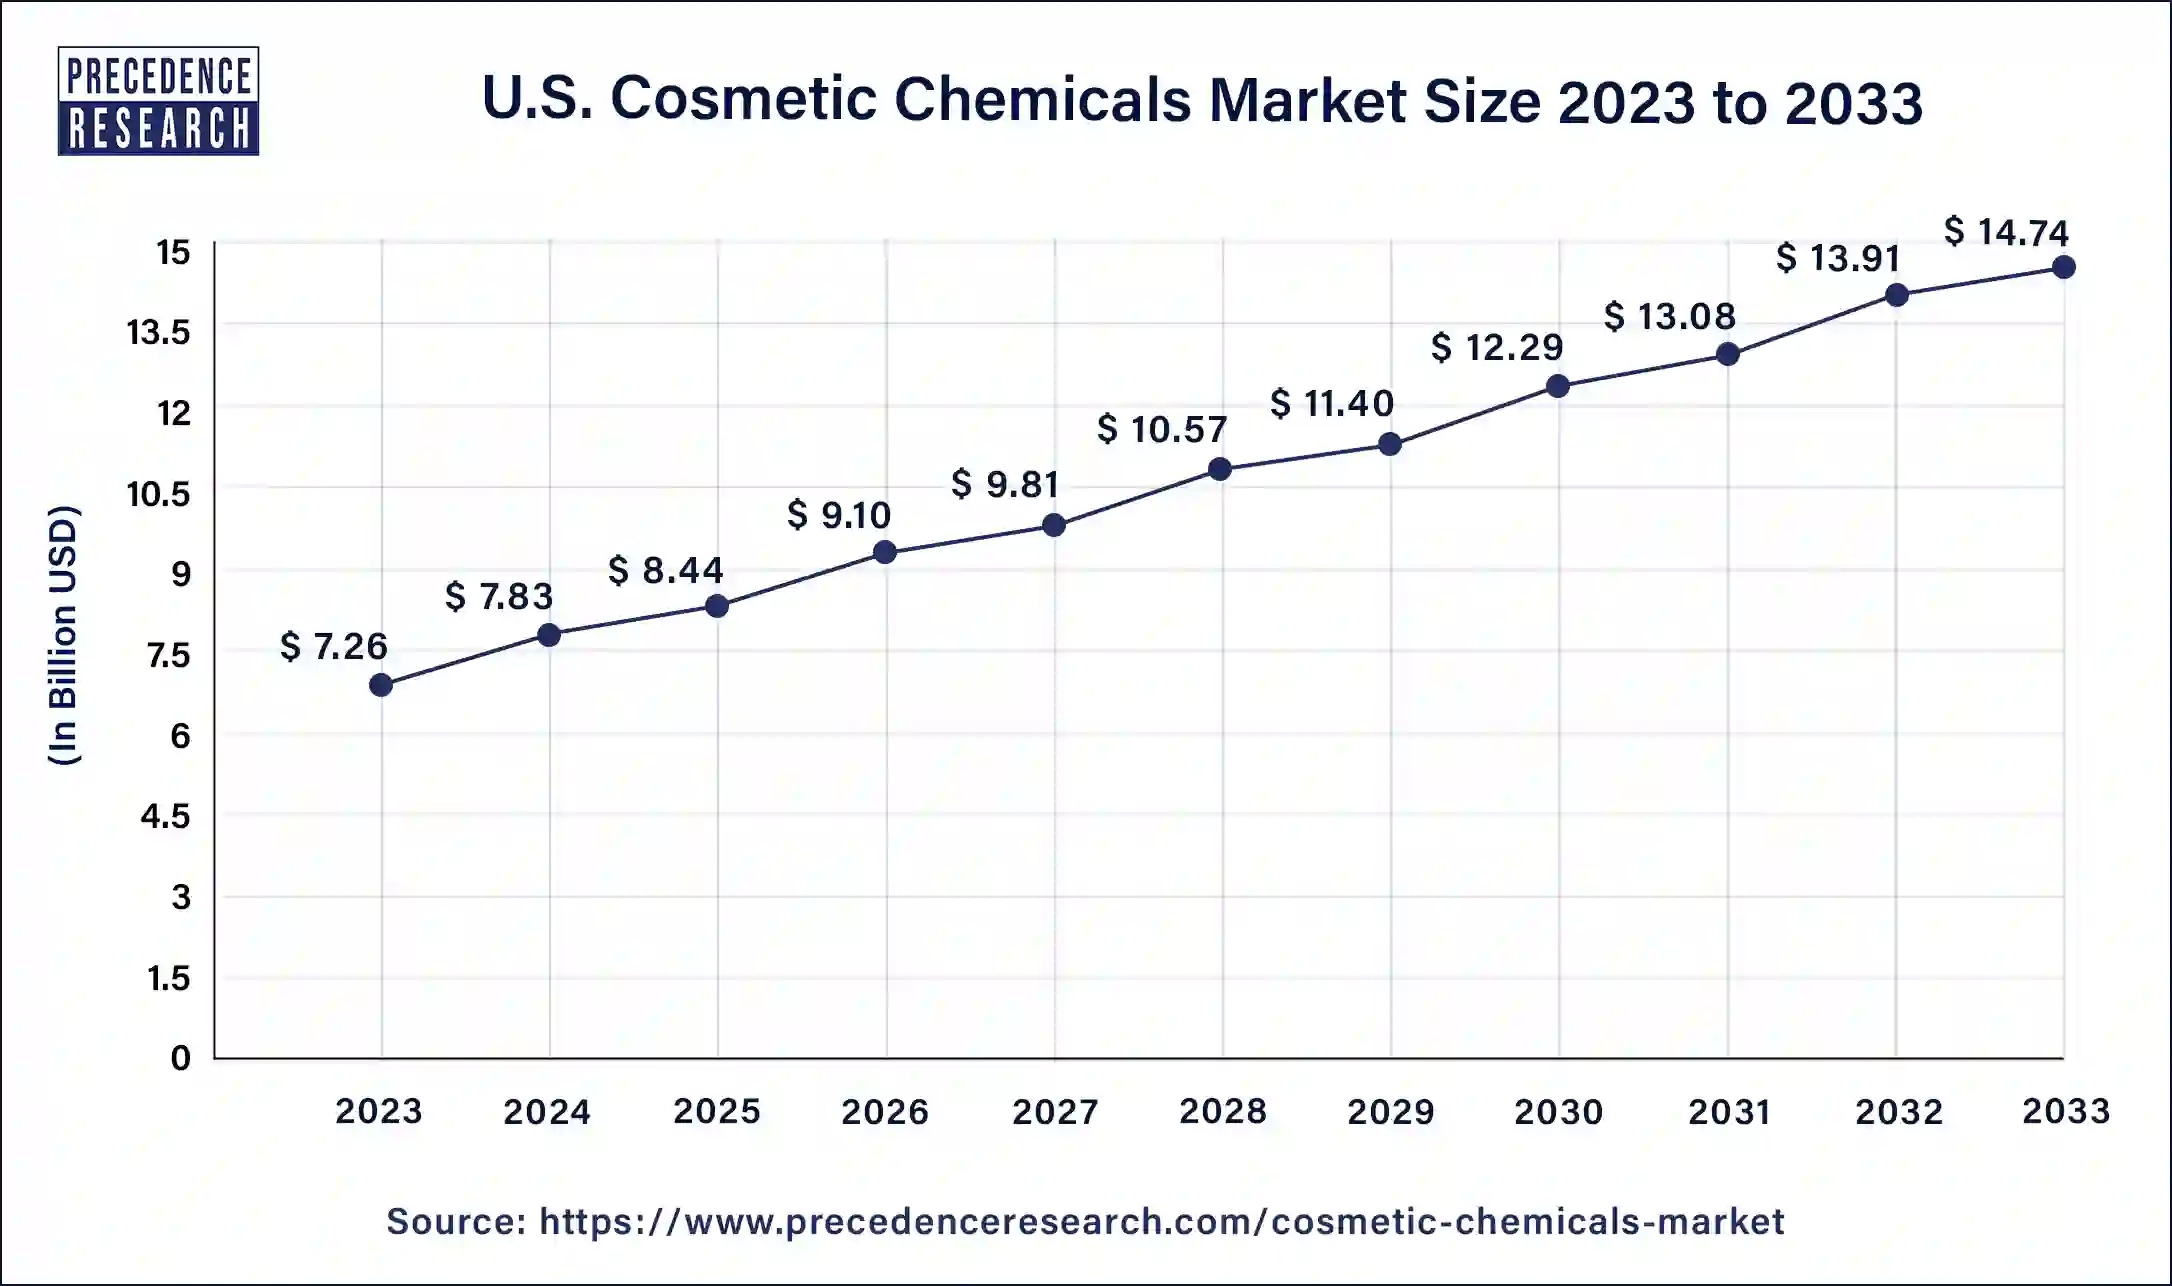 U.S. Cosmetic Chemicals Market Size 2024 to 2033